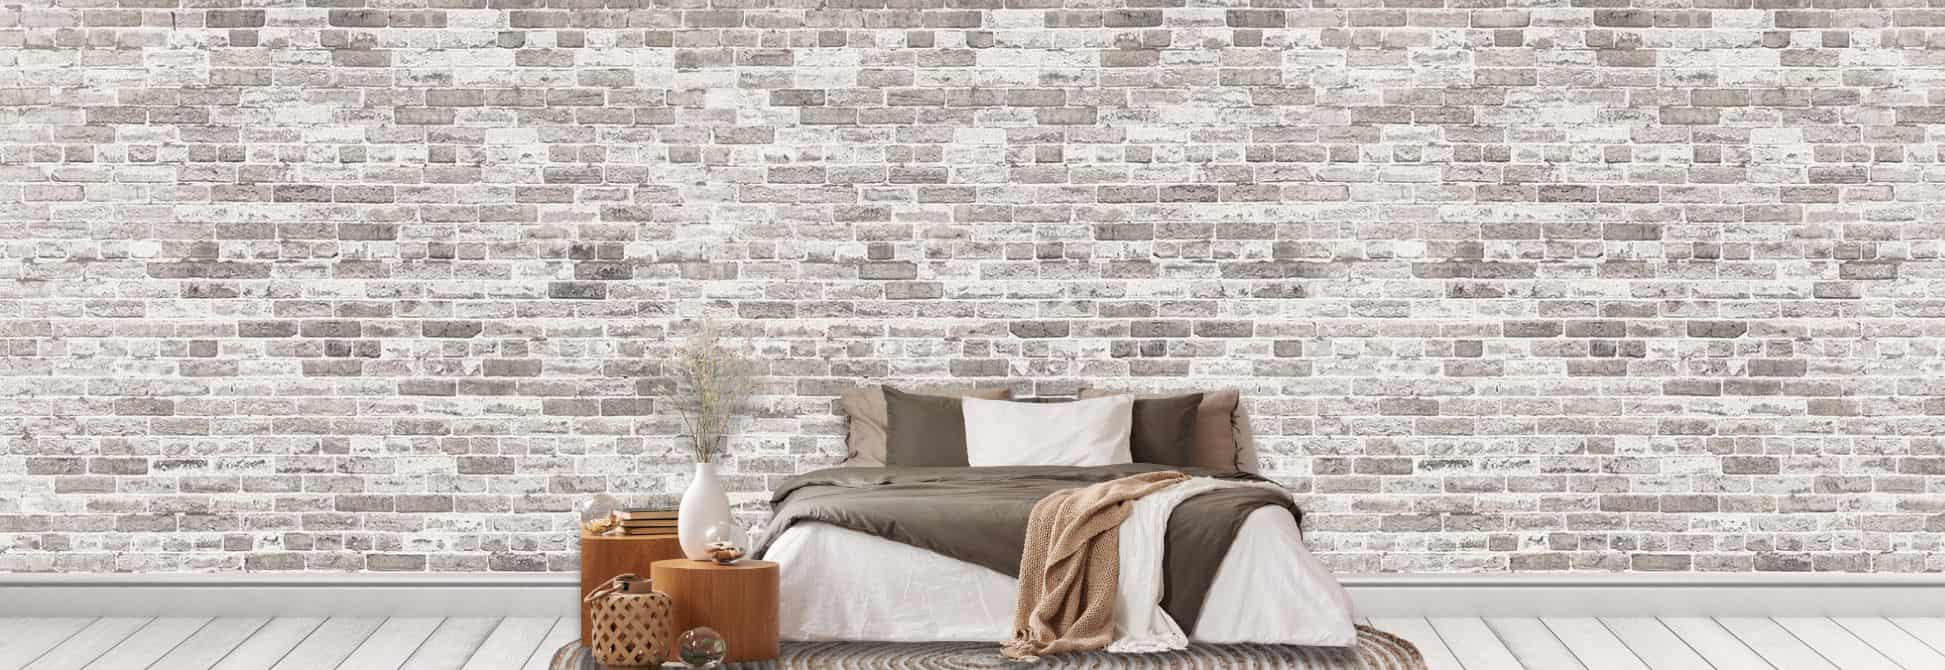 Shop Faux Wallpaper and Faux Wall Murals, like this brick wallpaper in a bedroom, from About Murals.